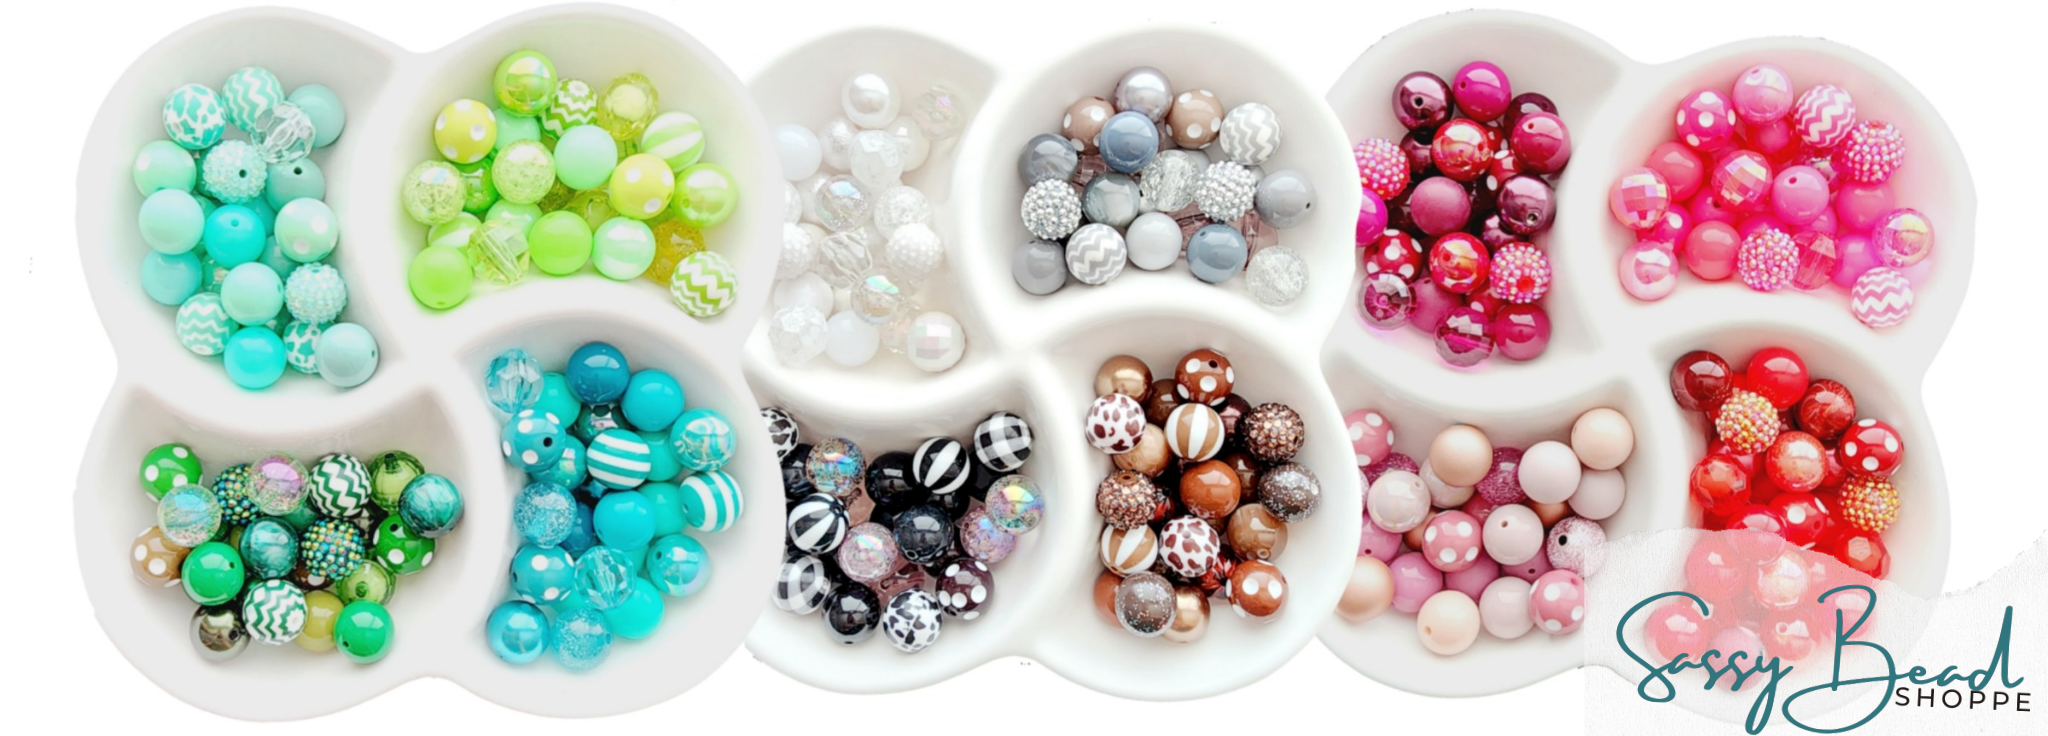 color pop collection by sassy bead shoppe